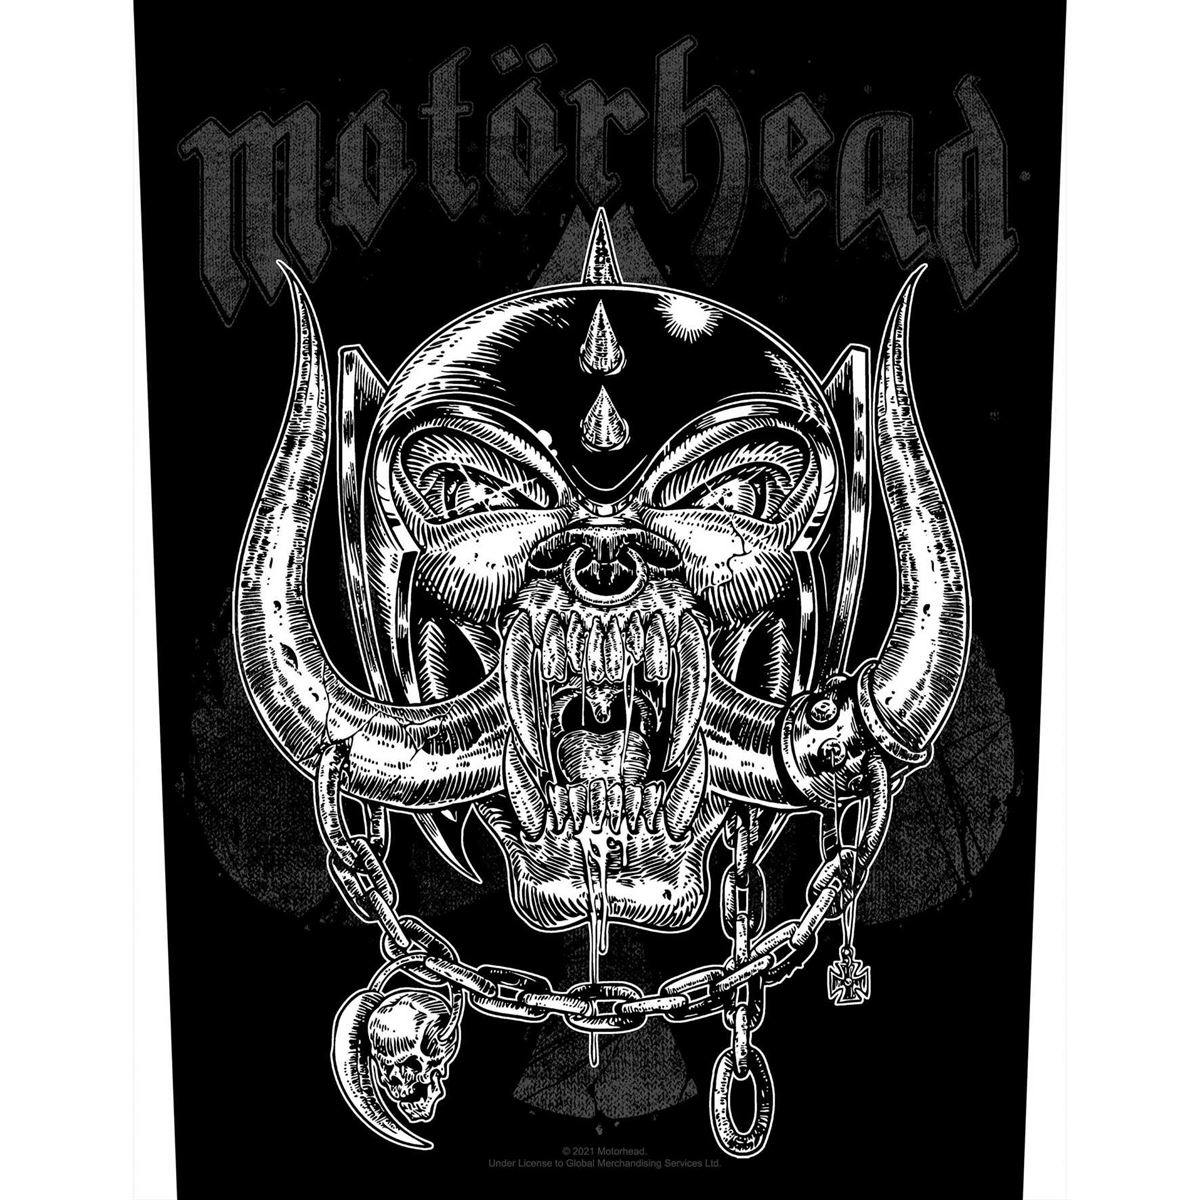 MOTORHEAD - ETCHED IRON  Back Patch